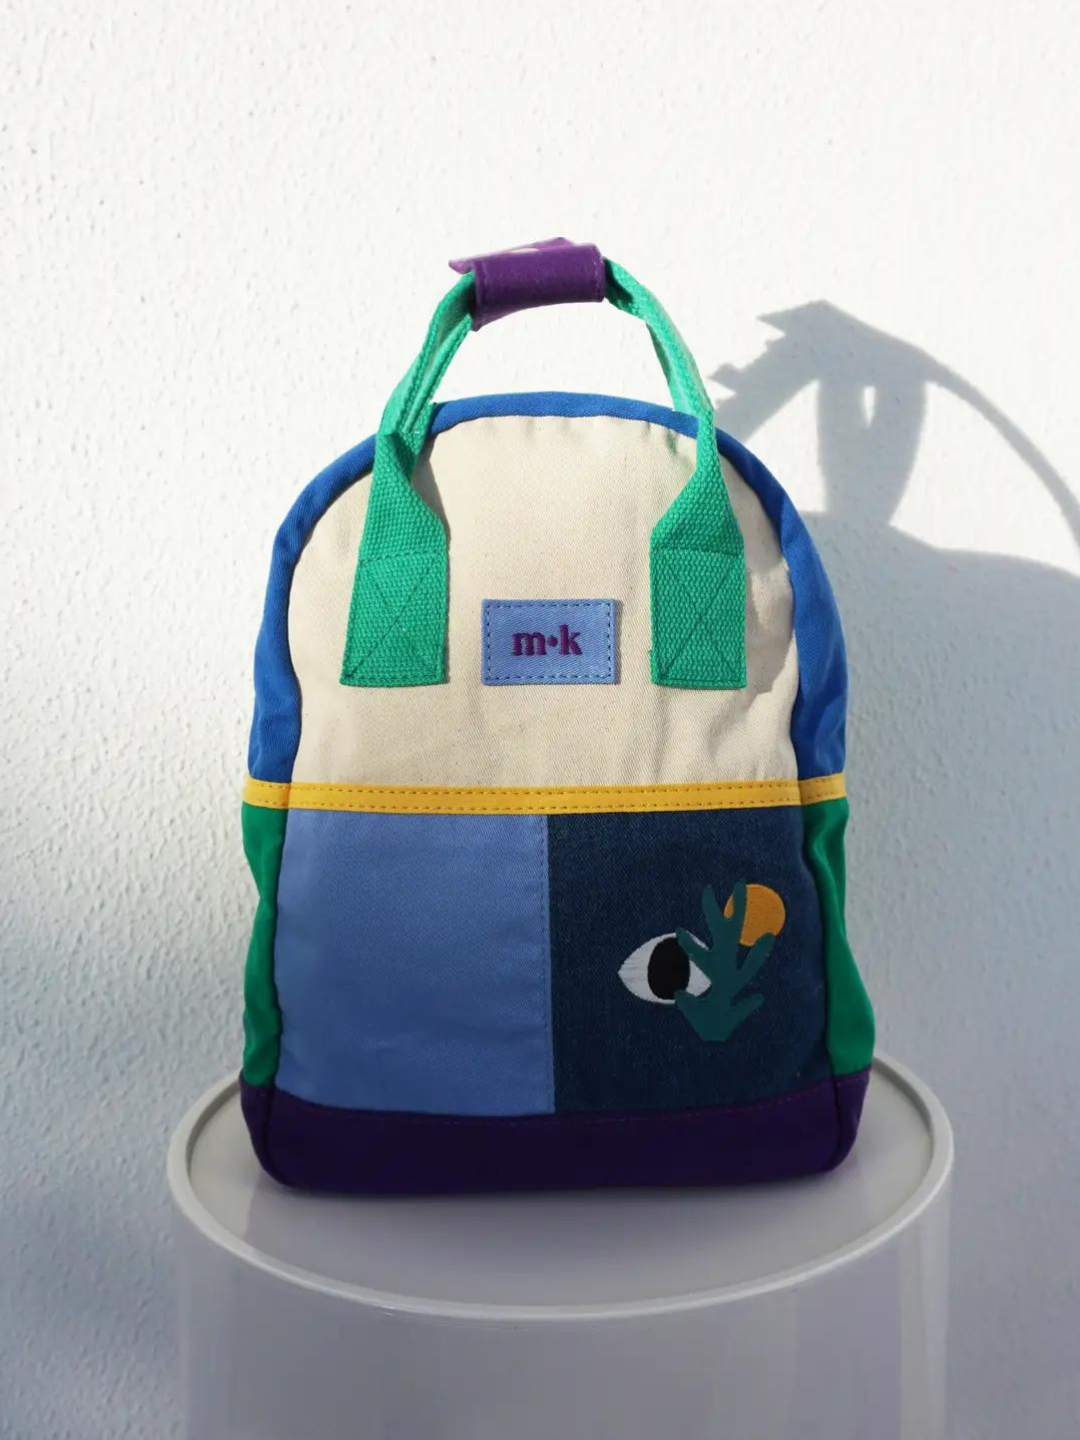 A colorblock backpack with green handles and sides, purple base, two blue patches below a cream top, one with images of an eye, a sun and a plant